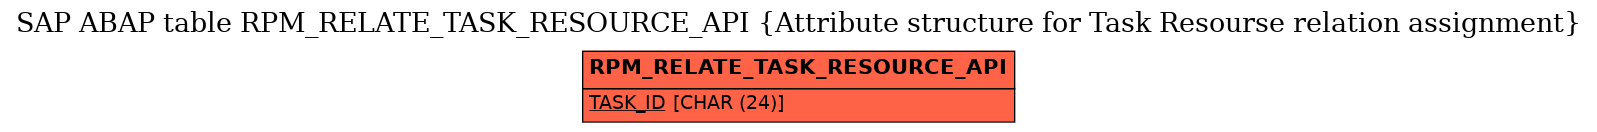 E-R Diagram for table RPM_RELATE_TASK_RESOURCE_API (Attribute structure for Task Resourse relation assignment)